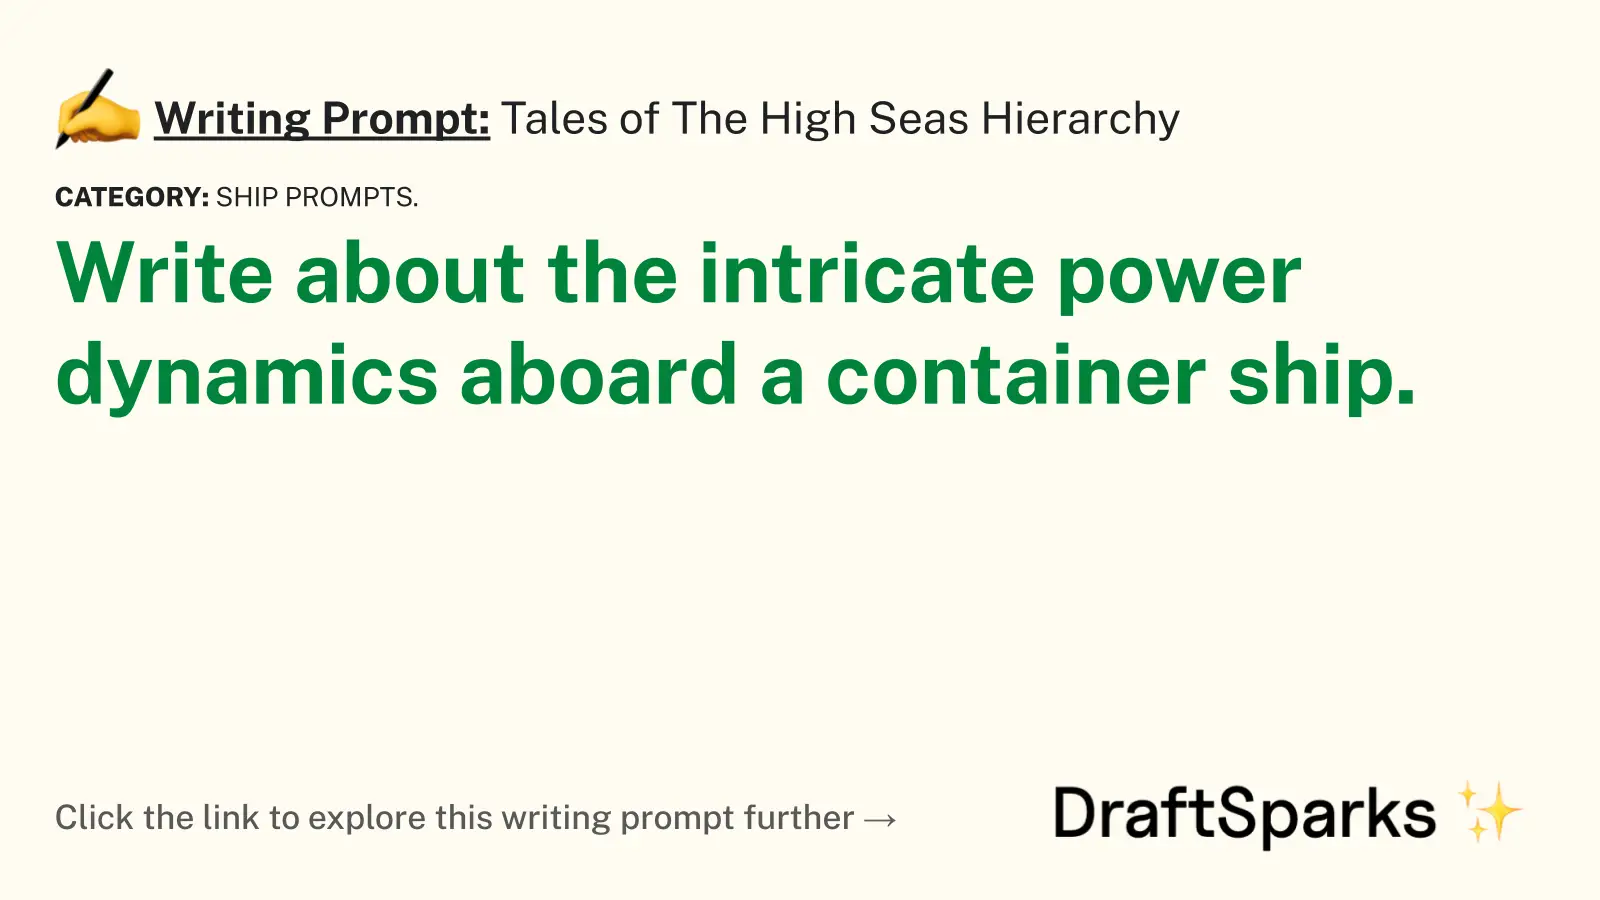 Tales of The High Seas Hierarchy